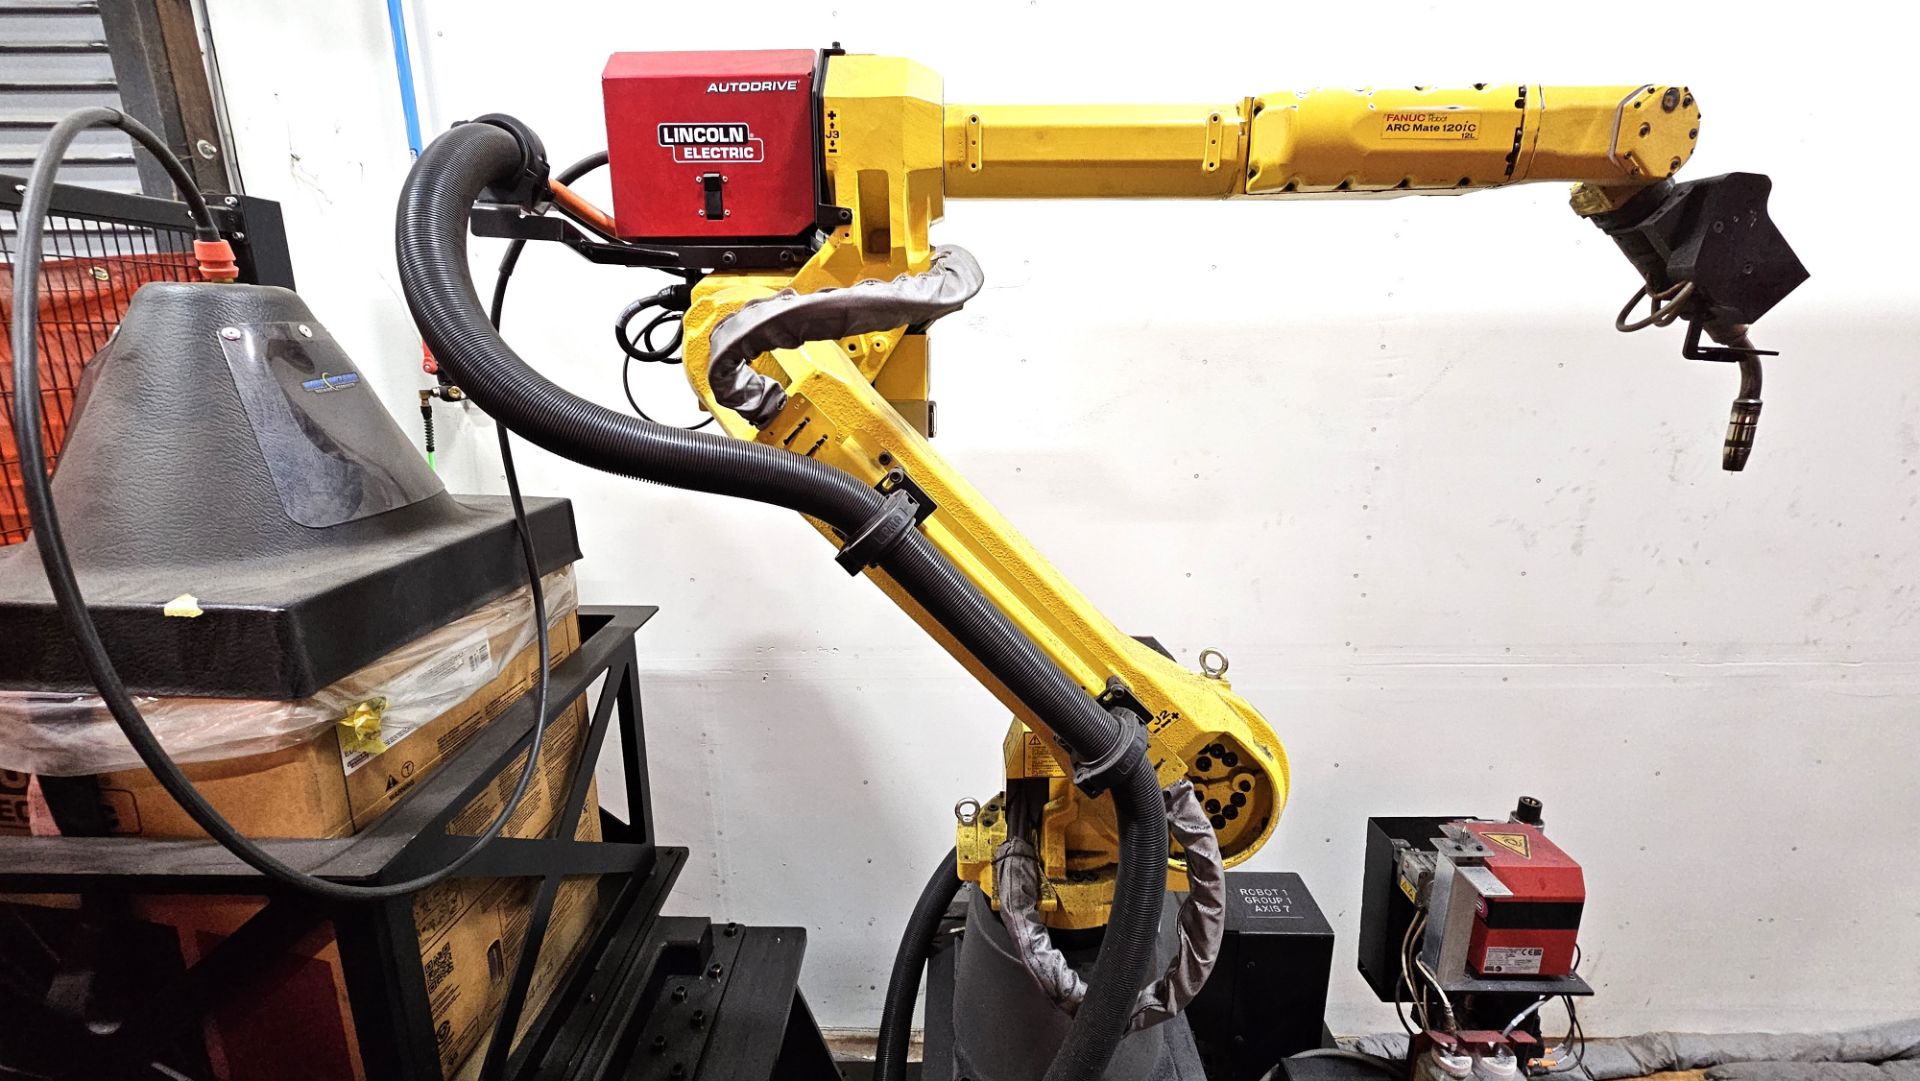 Lincoln/Fanuc Robotic Welding System - Image 12 of 26